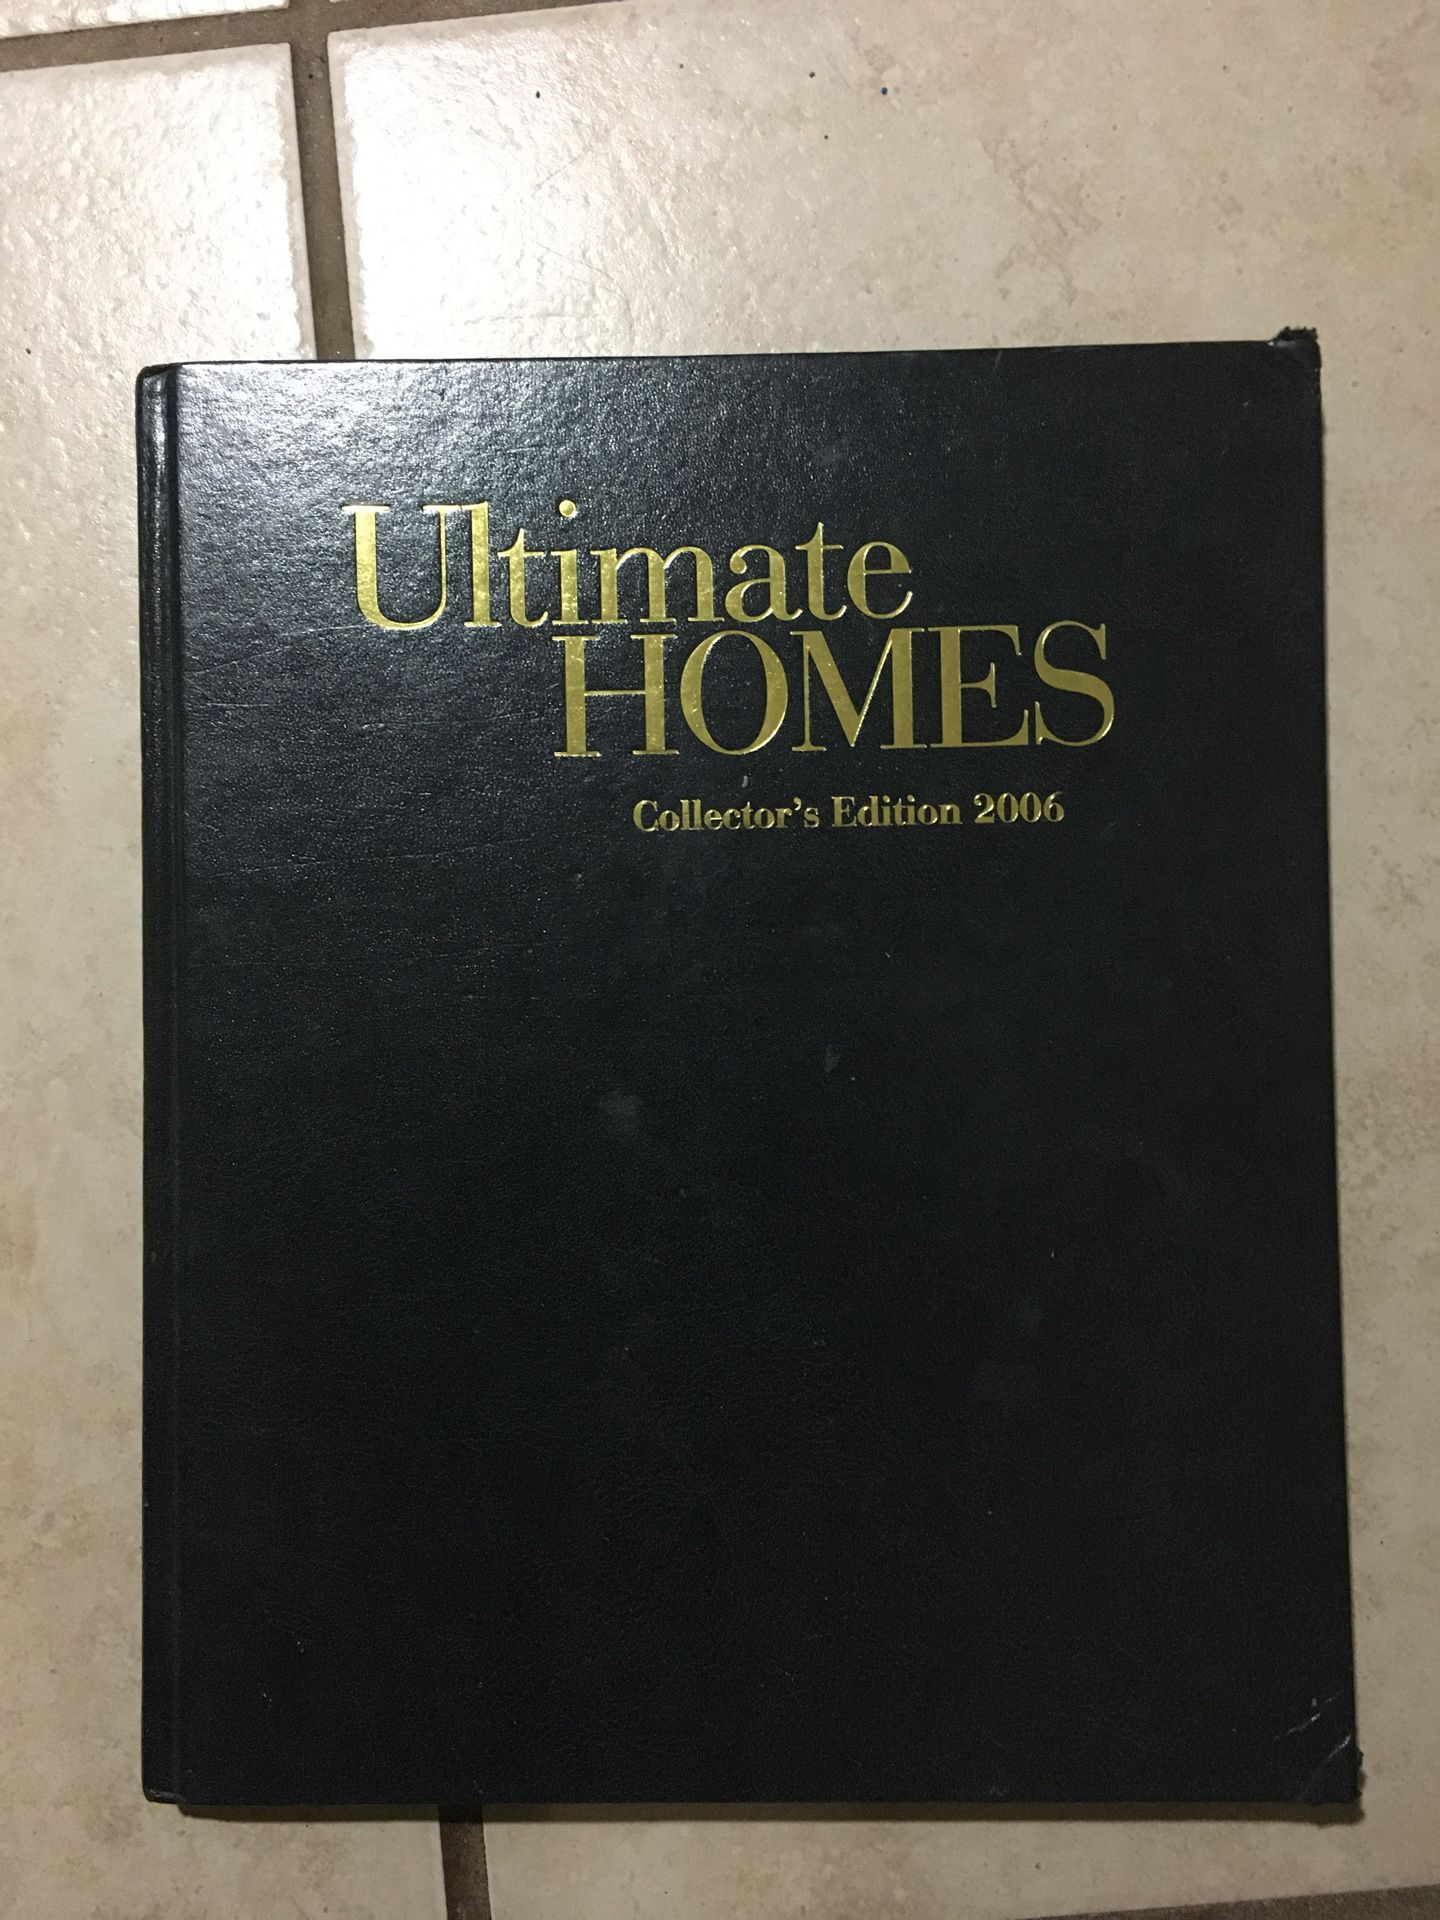 Ultimate Homes 2006